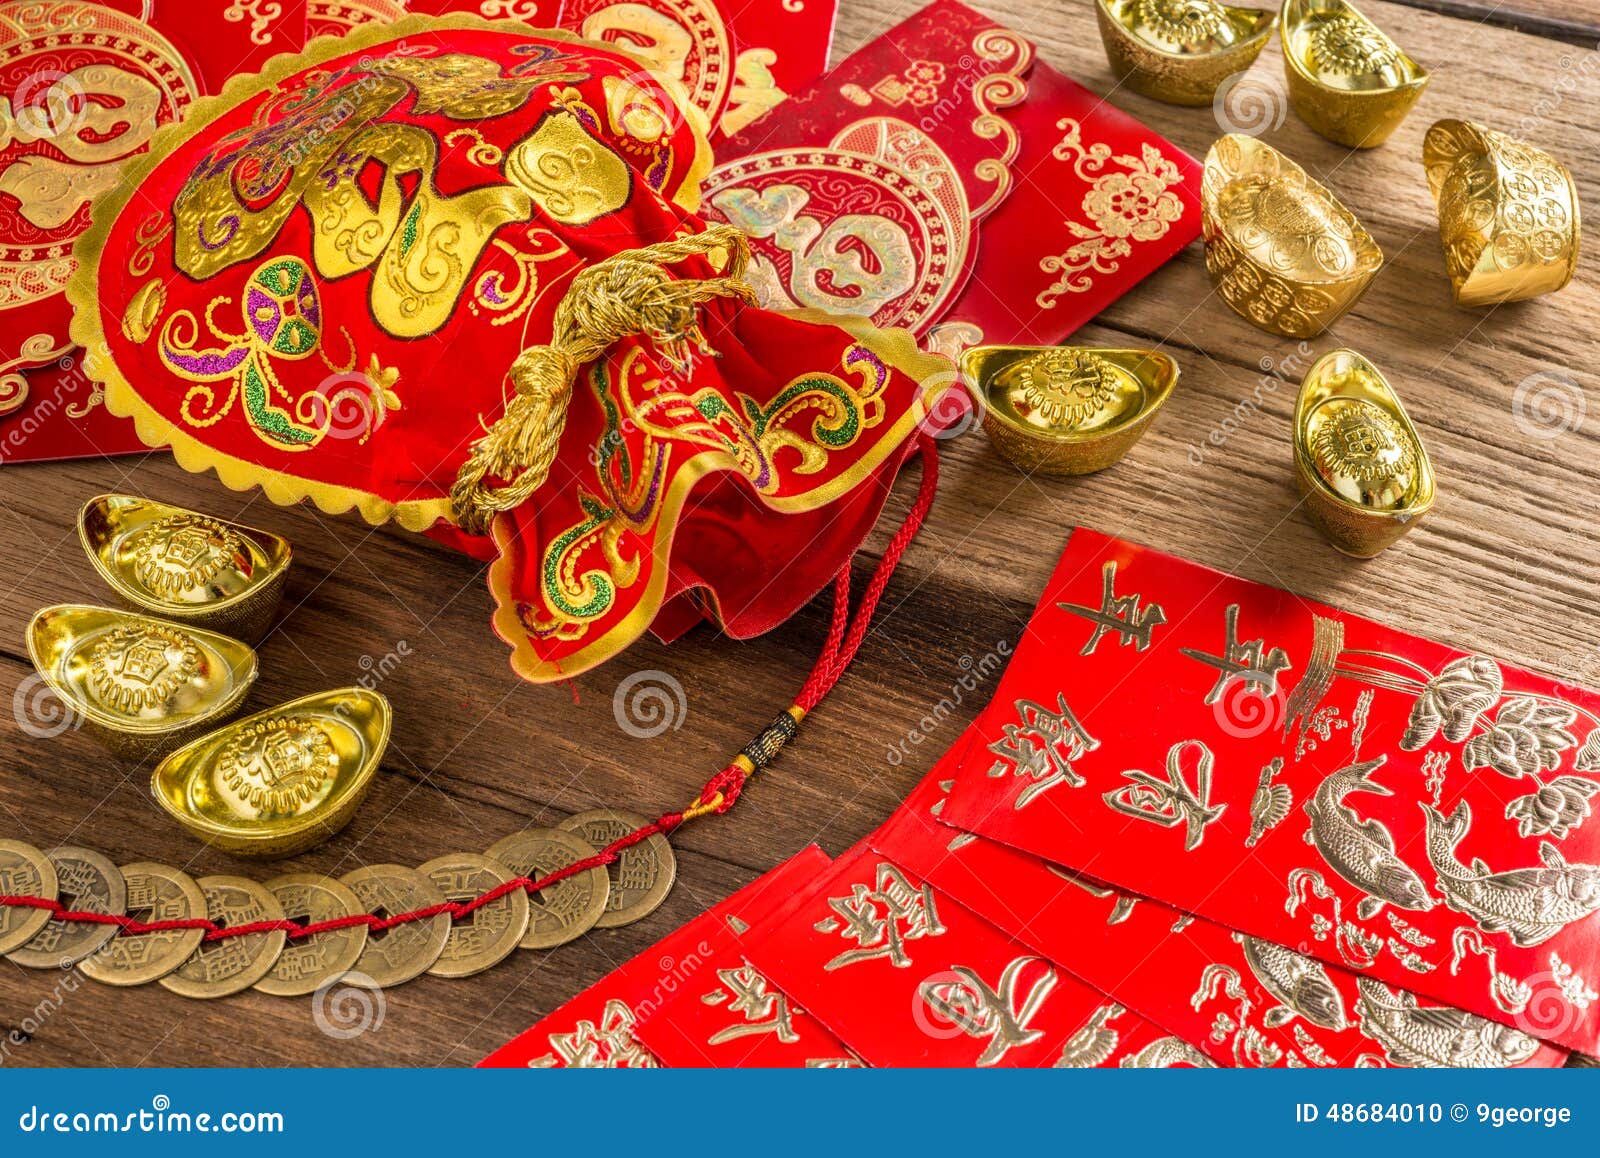 Chinese New Year Decoration,Chinese Red Bag And Golden Bullion Stock Photo - Image ...1300 x 958